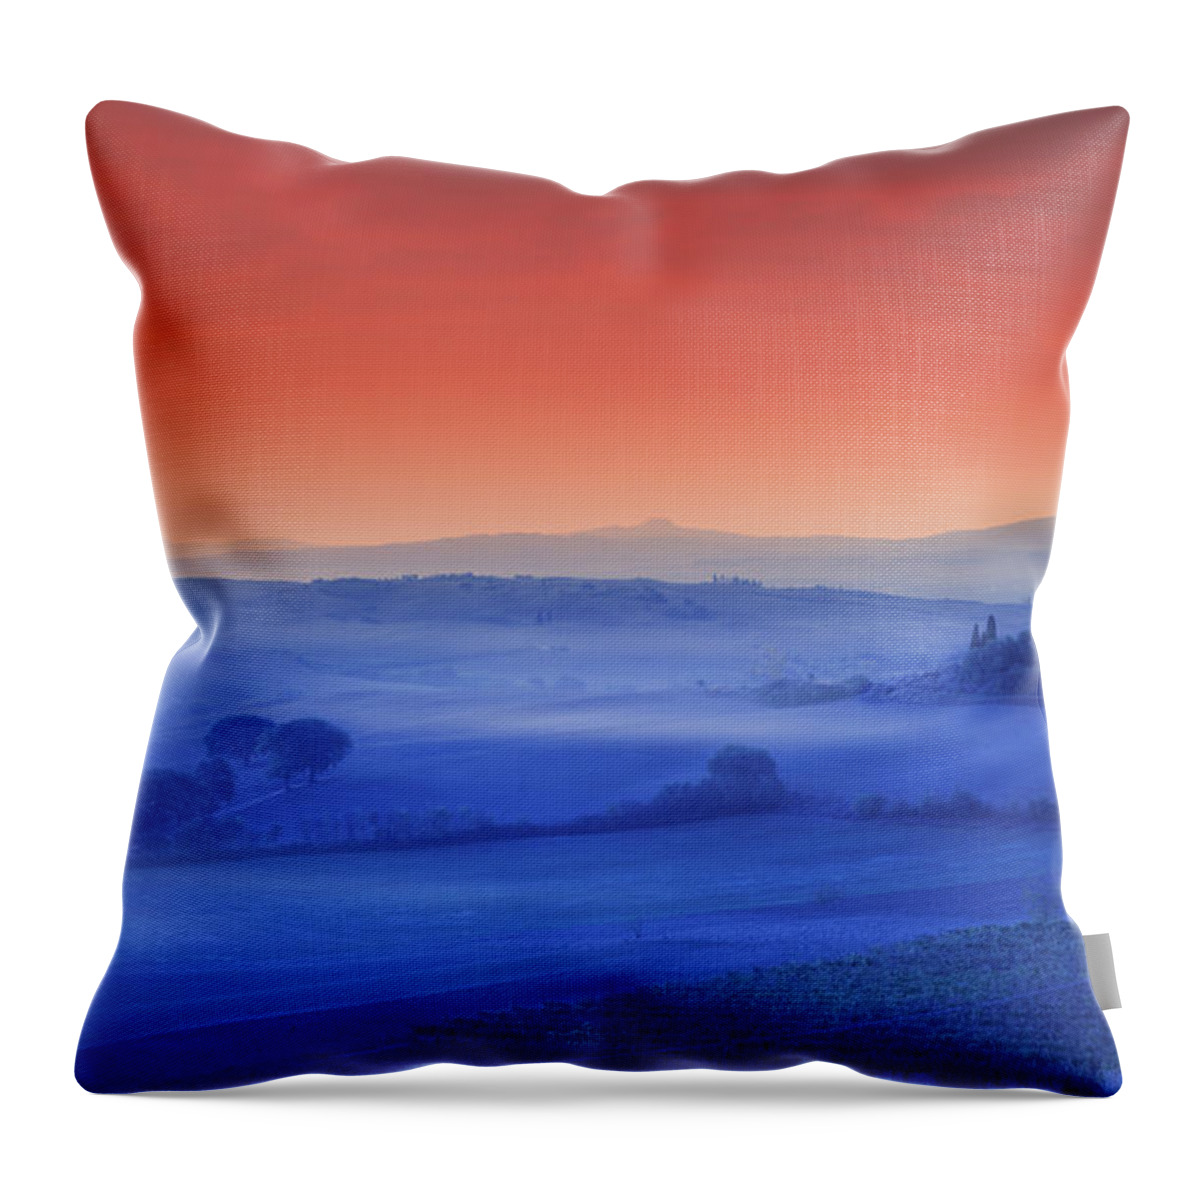 Scenics Throw Pillow featuring the photograph Farm In Tuscany by Mammuth